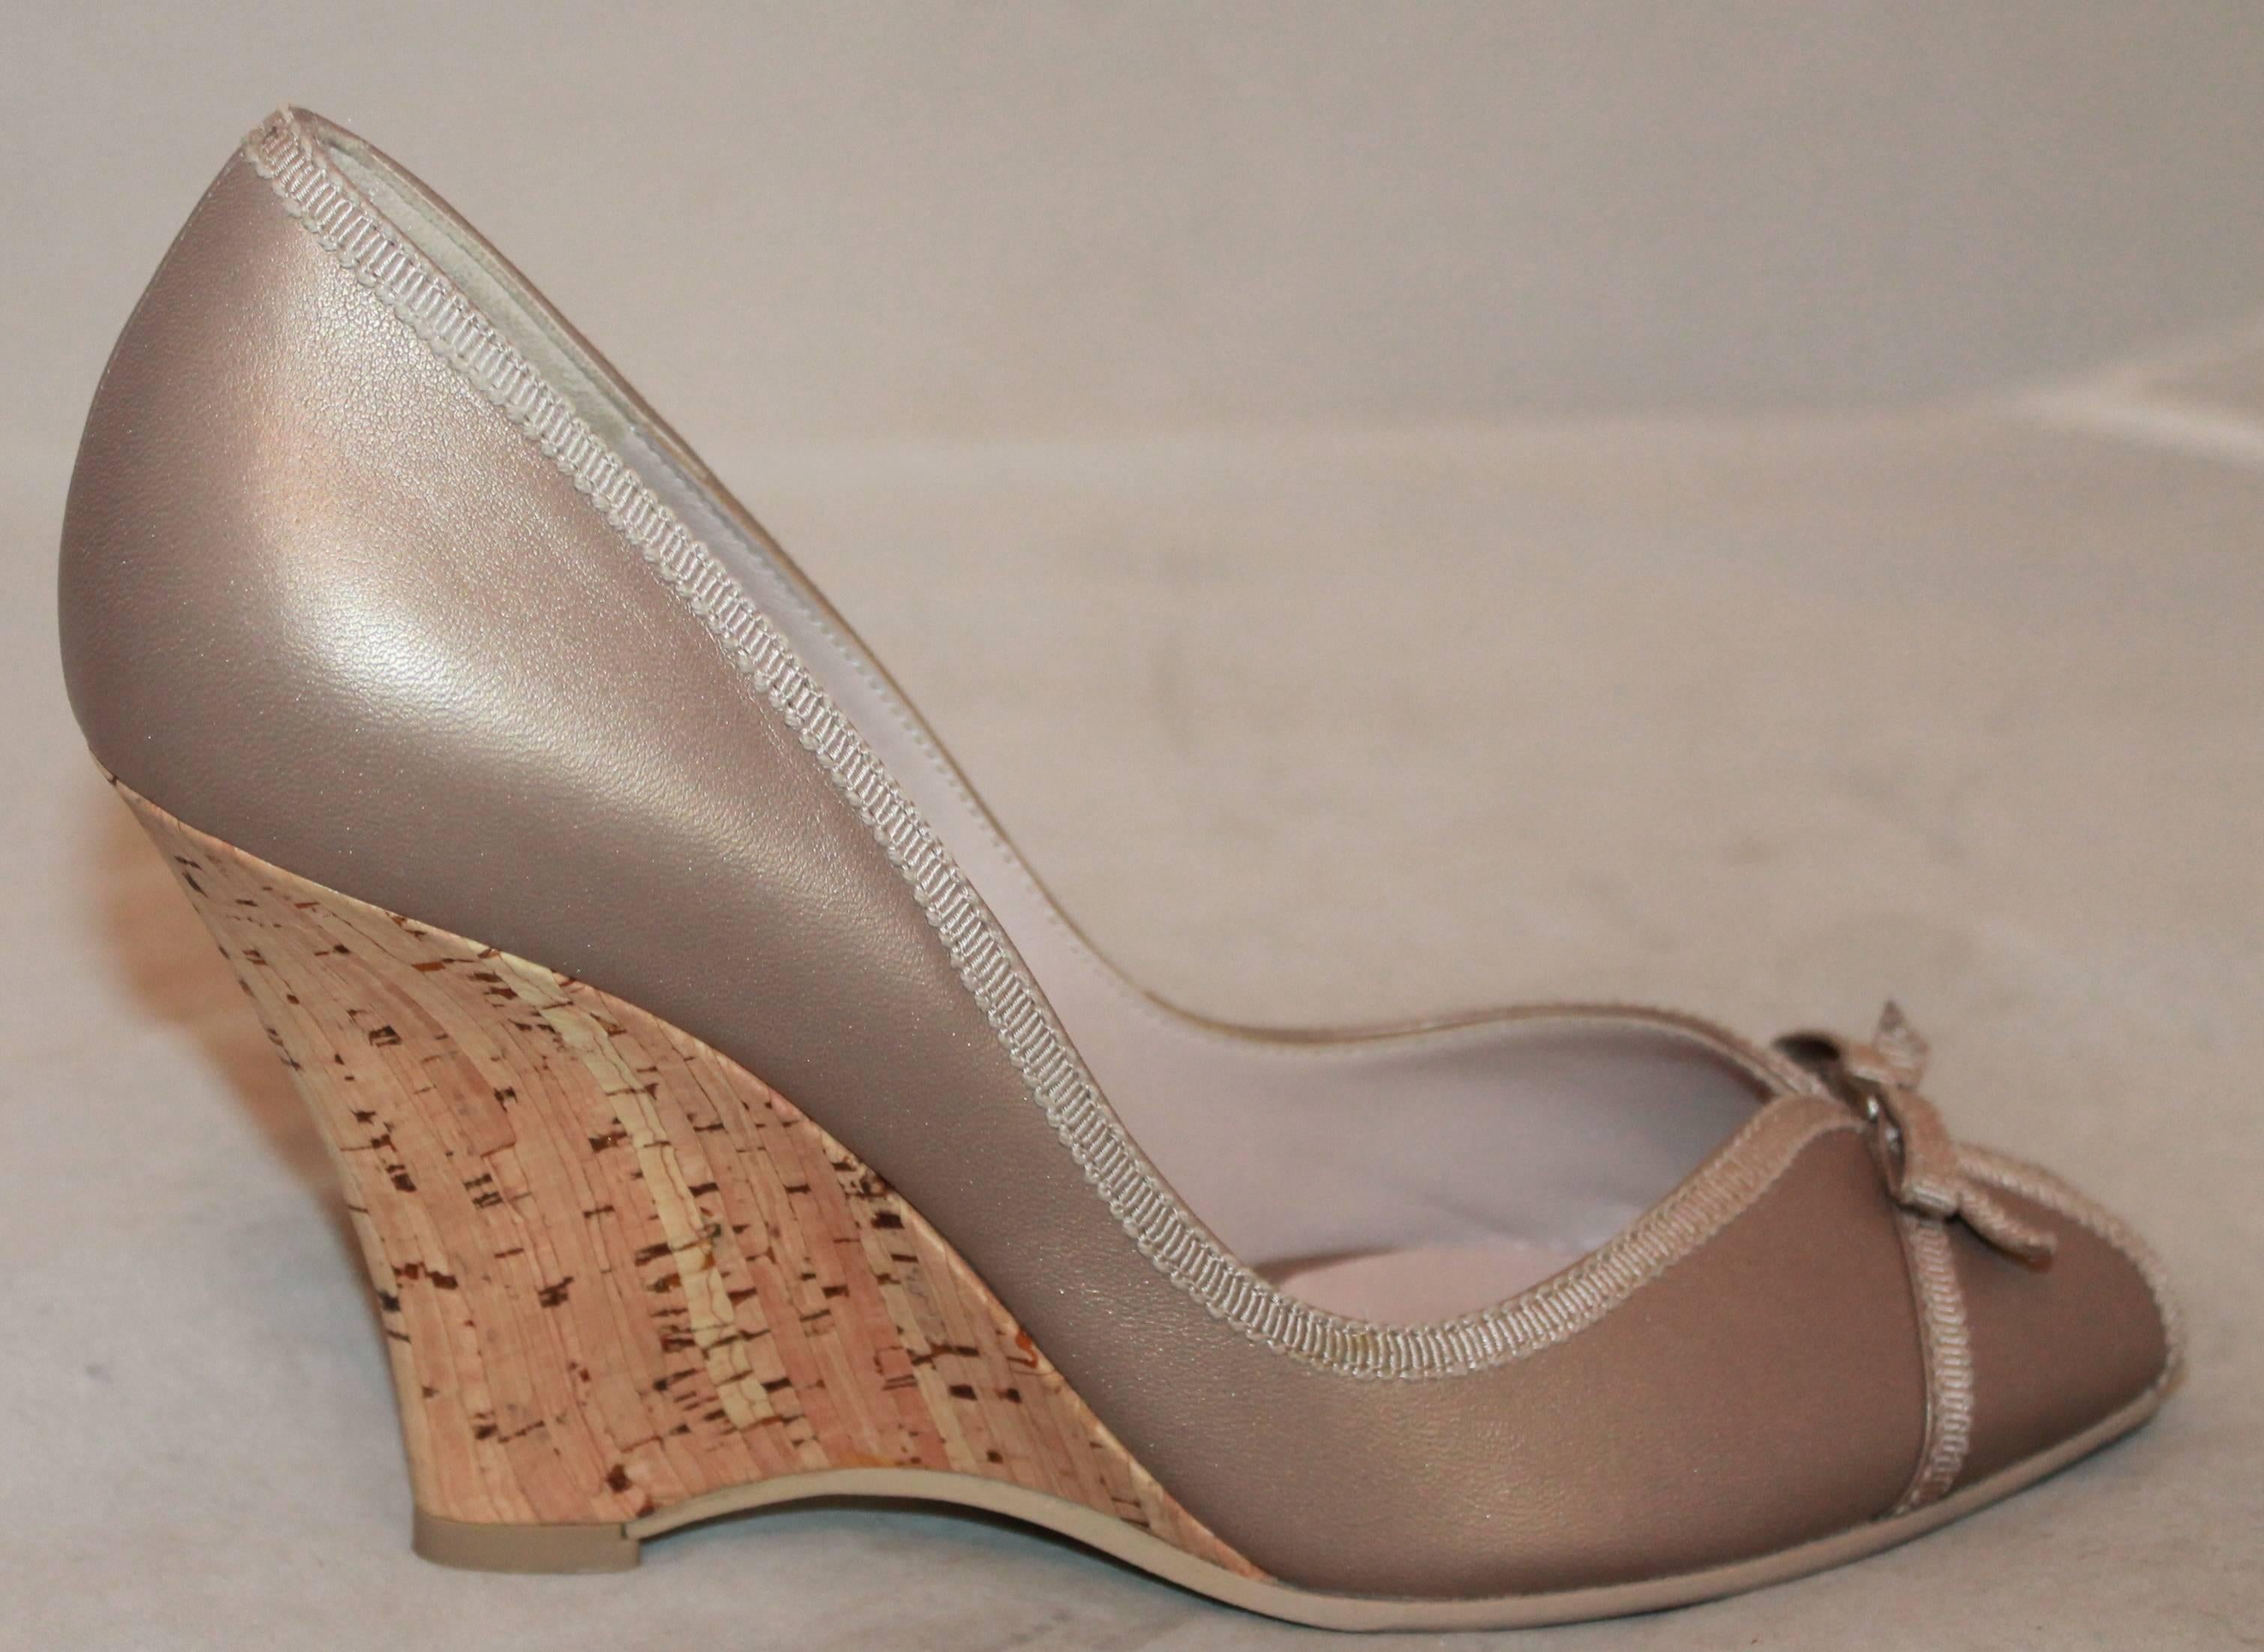 Salvatore Ferragamo Champagne Leather Peep Toe Cork Wedges - 7B.  These gorgeous shoes have never been worn.  They feature a beautiful shiny champagne leather, a grosgrain ribbon trim and bow, and a cork wedge.

Measurement:
Heel: 3.5